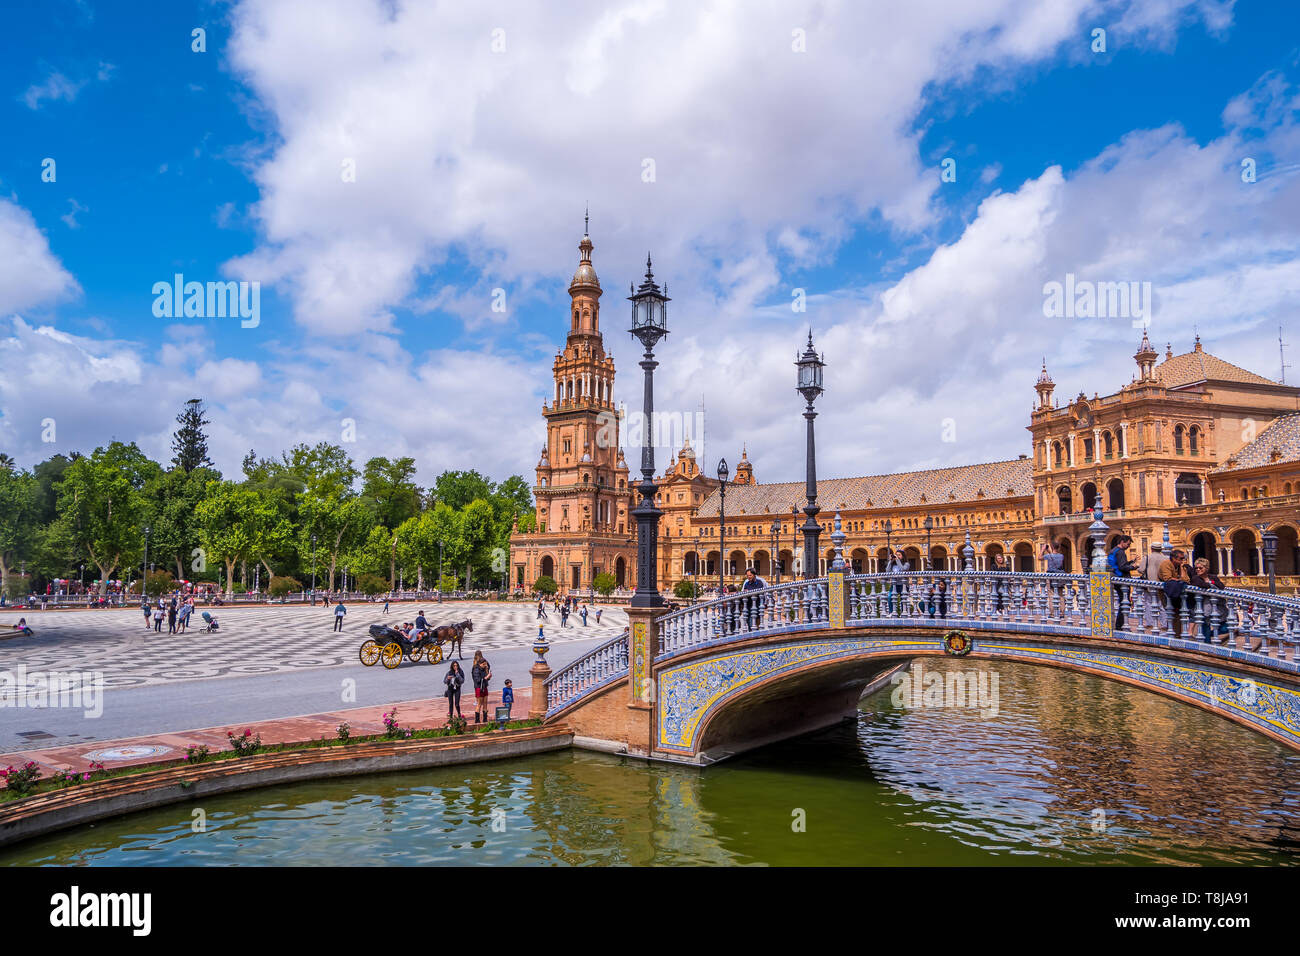 Seville Spain May 8th 2019 The Plaza de Espania is a Square located in the Park in Seville Built in 1928 for the Ibero-American Exposition of 1929. Stock Photo